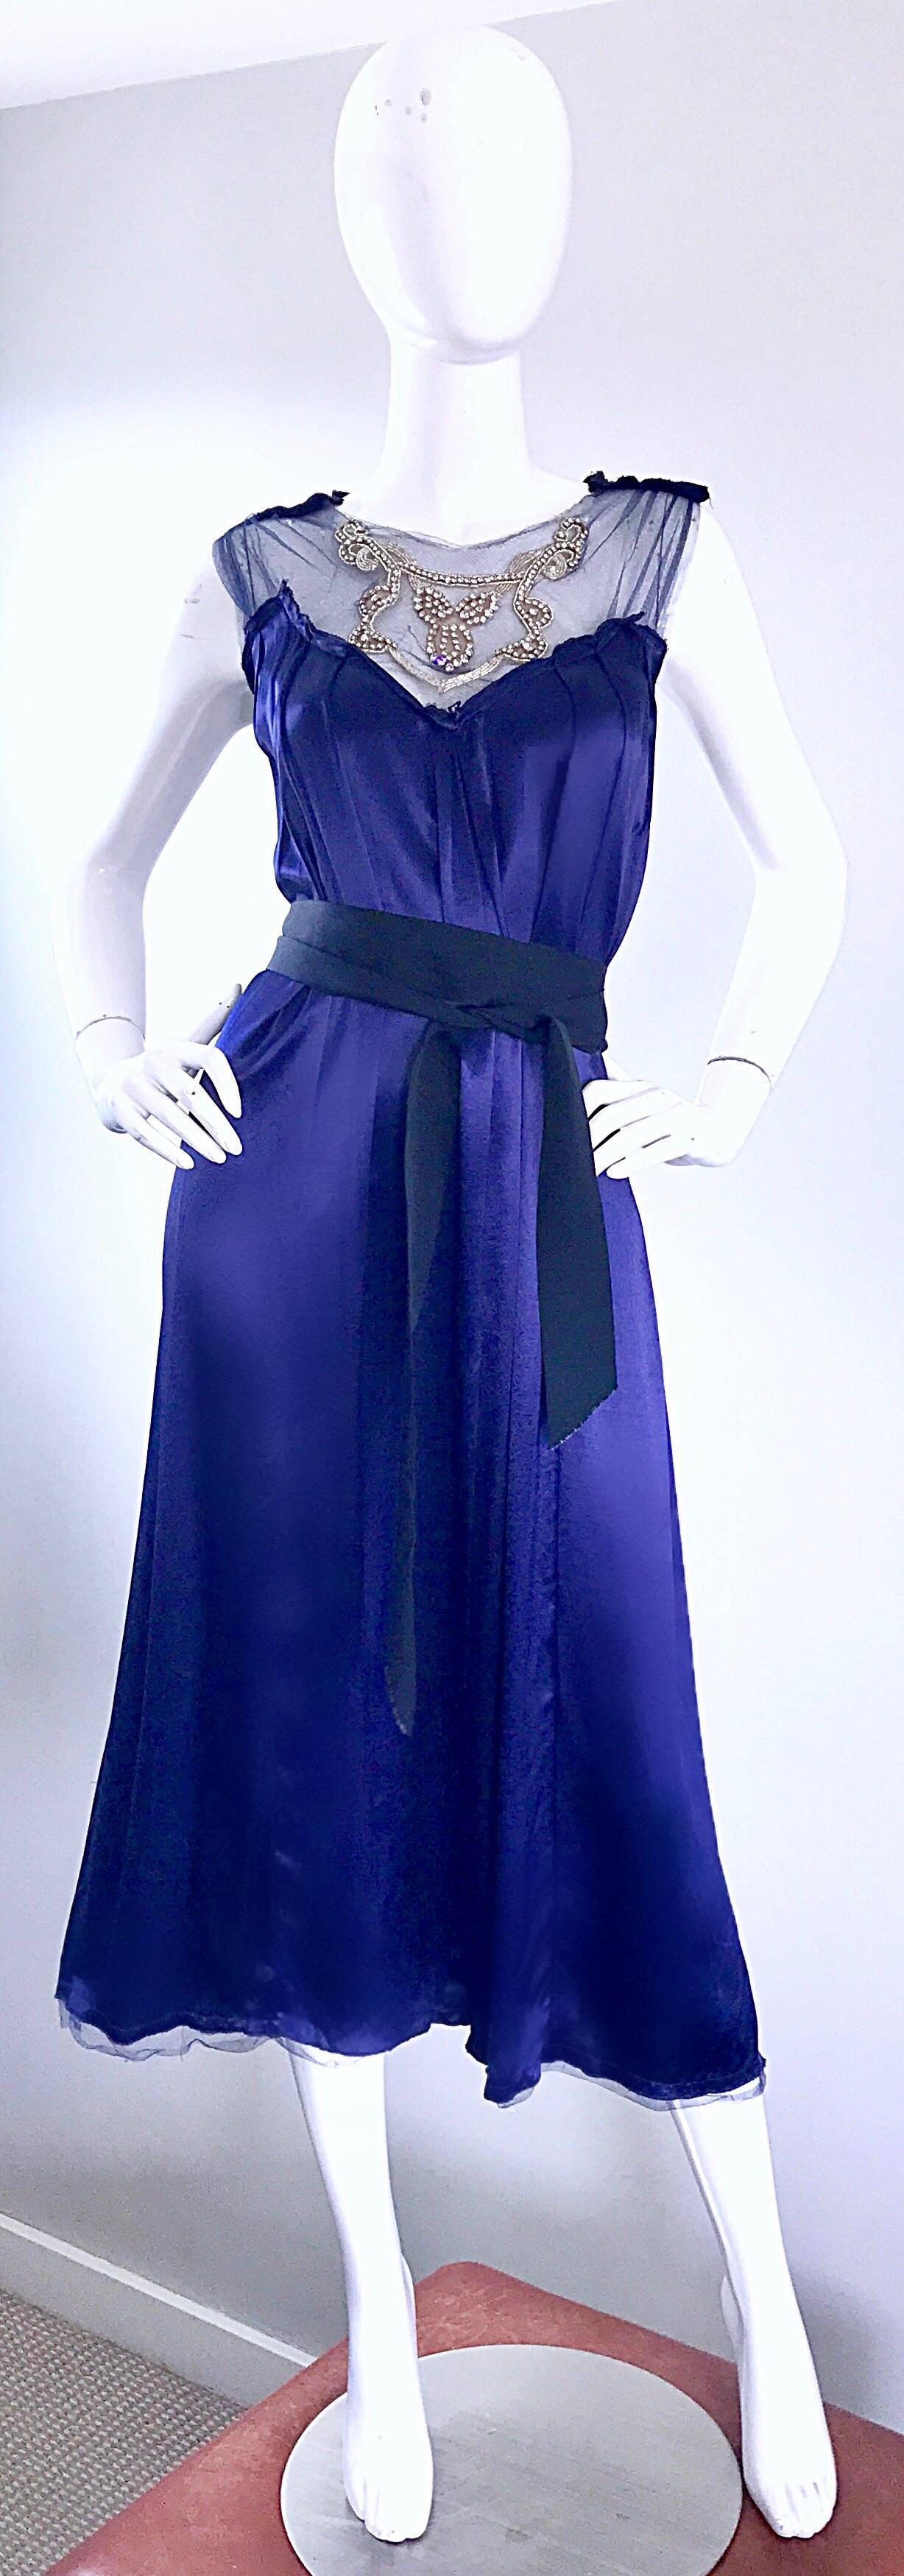 Gorgeous mid 1990s TRELISE COOPER navy blue 'liquid' silk belted midi dress! This beauty is so flattering and forgiving! Features hundreds of hand-sewn rhinestones on the mesh bodice. Detachable black silk grosgrain ribbon belt ties around twice, or